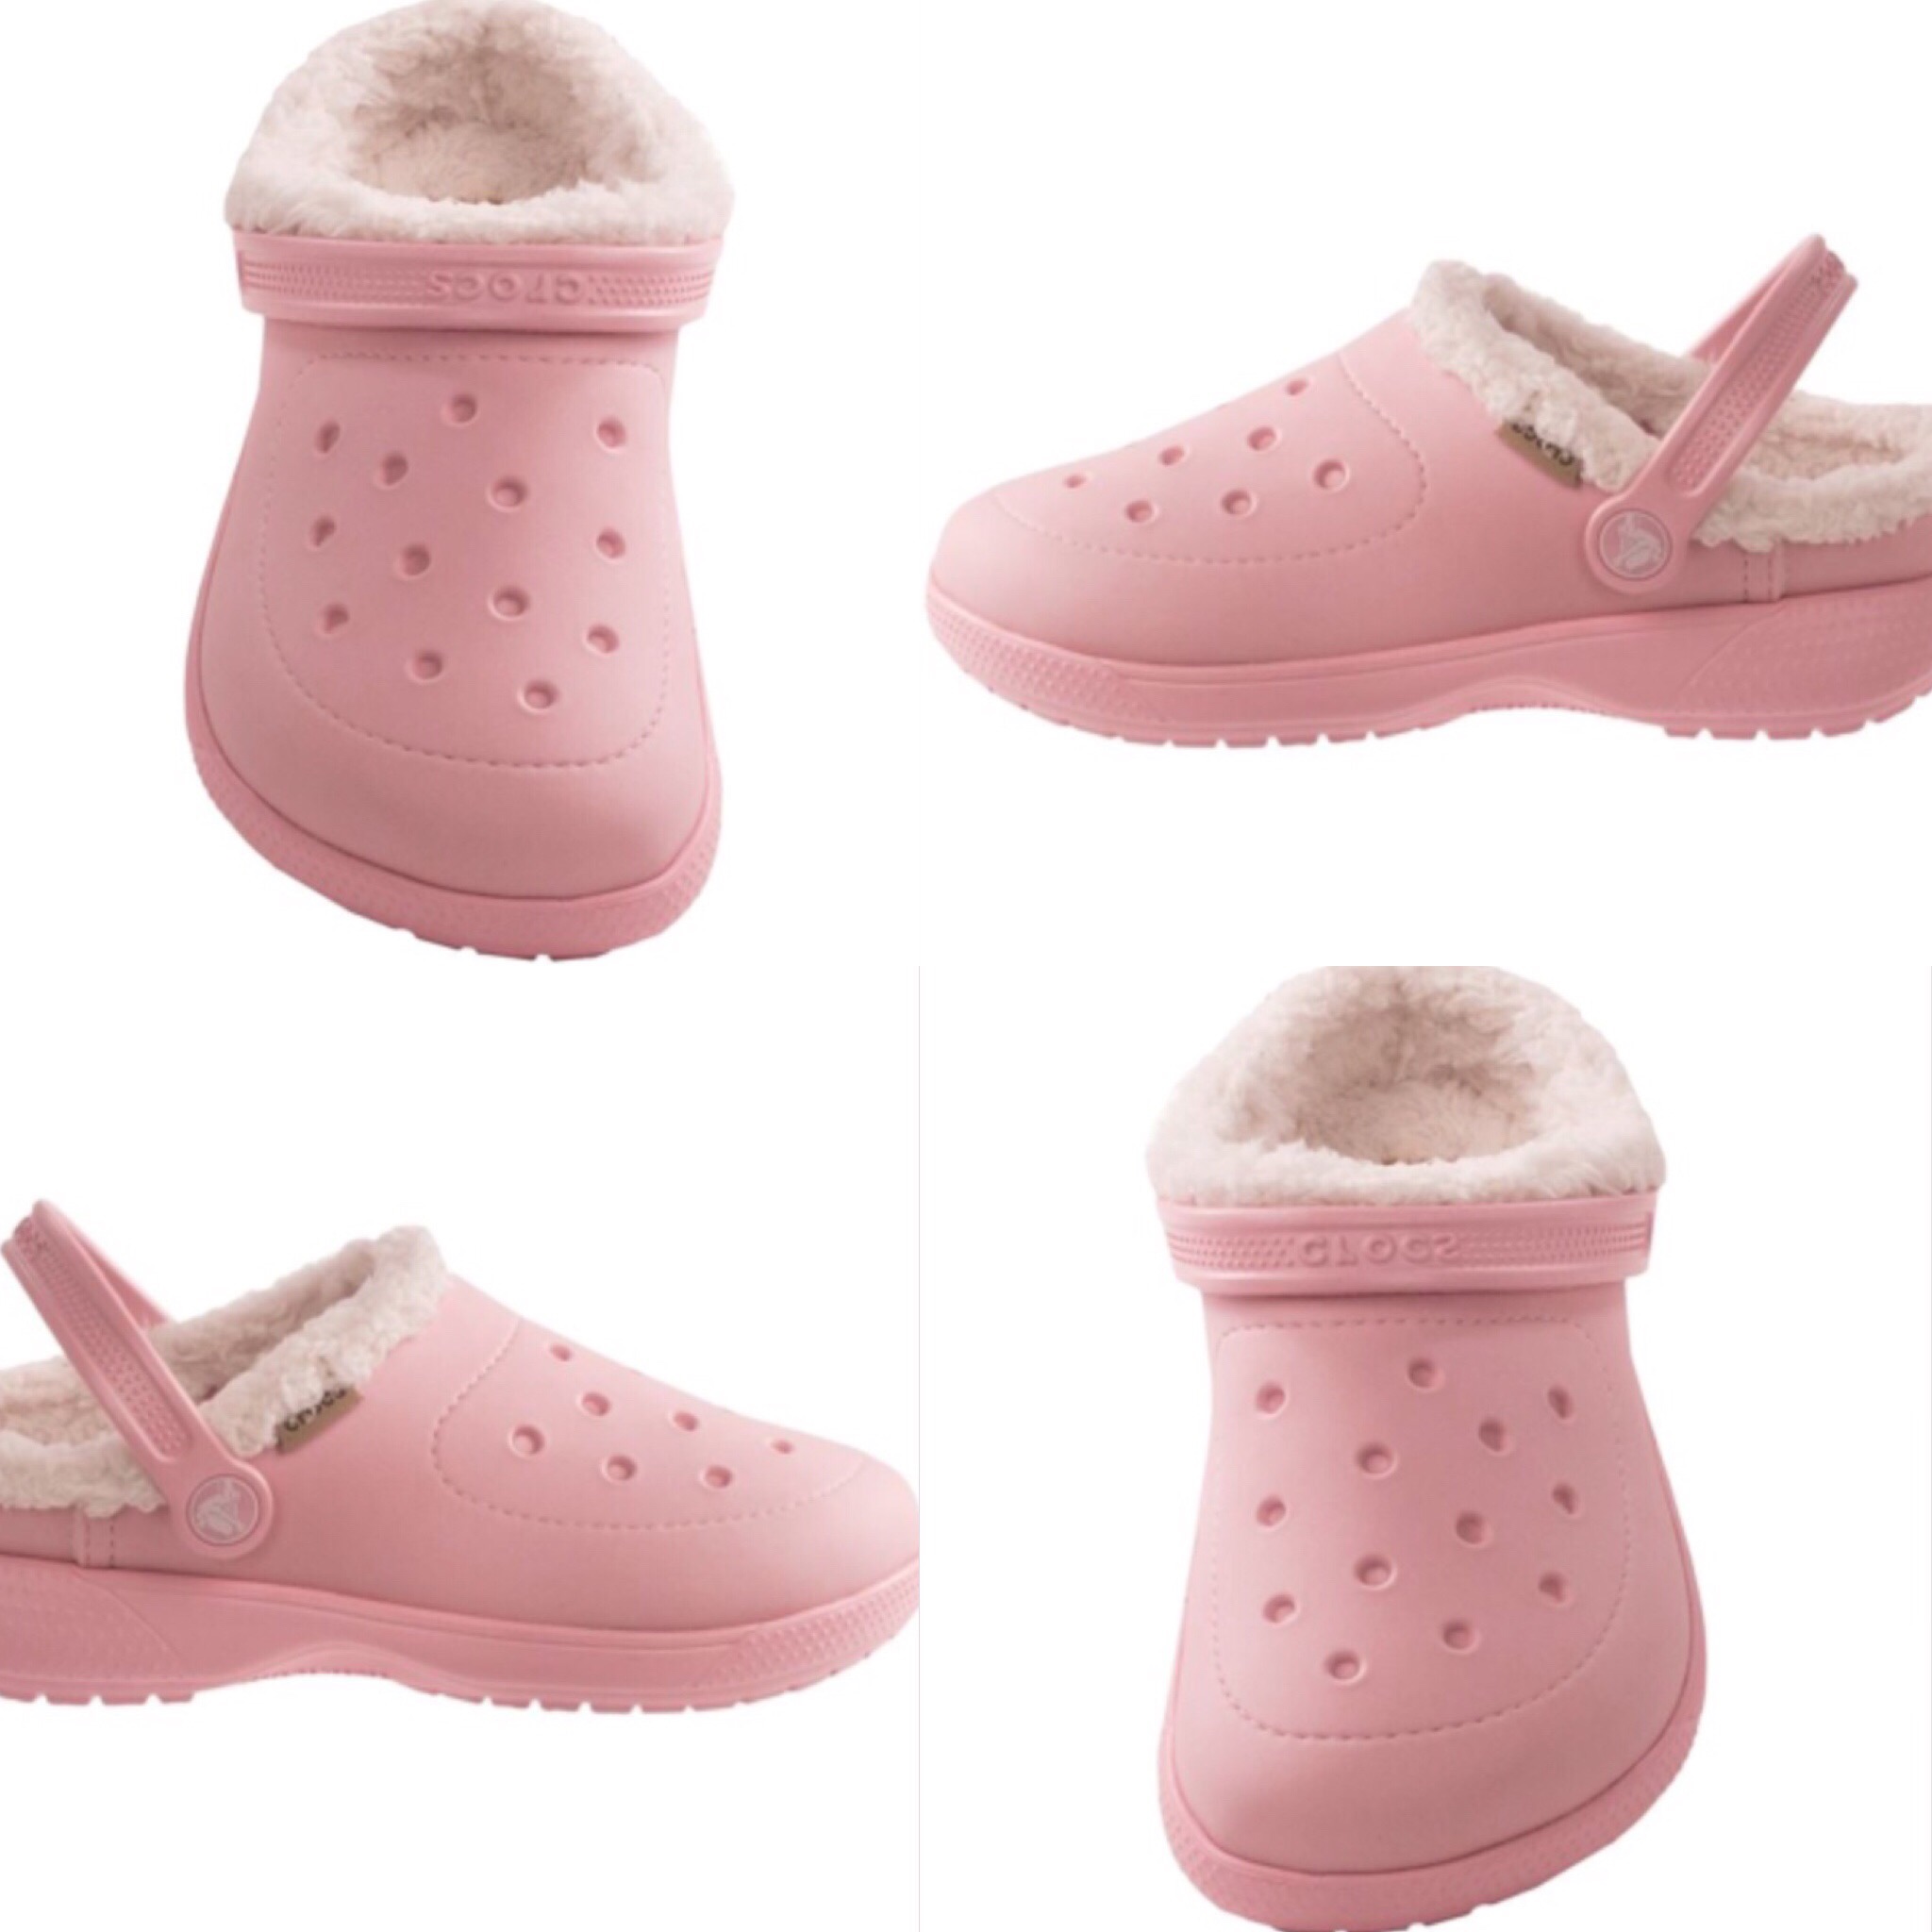 can you put jibbitz in fuzzy crocs